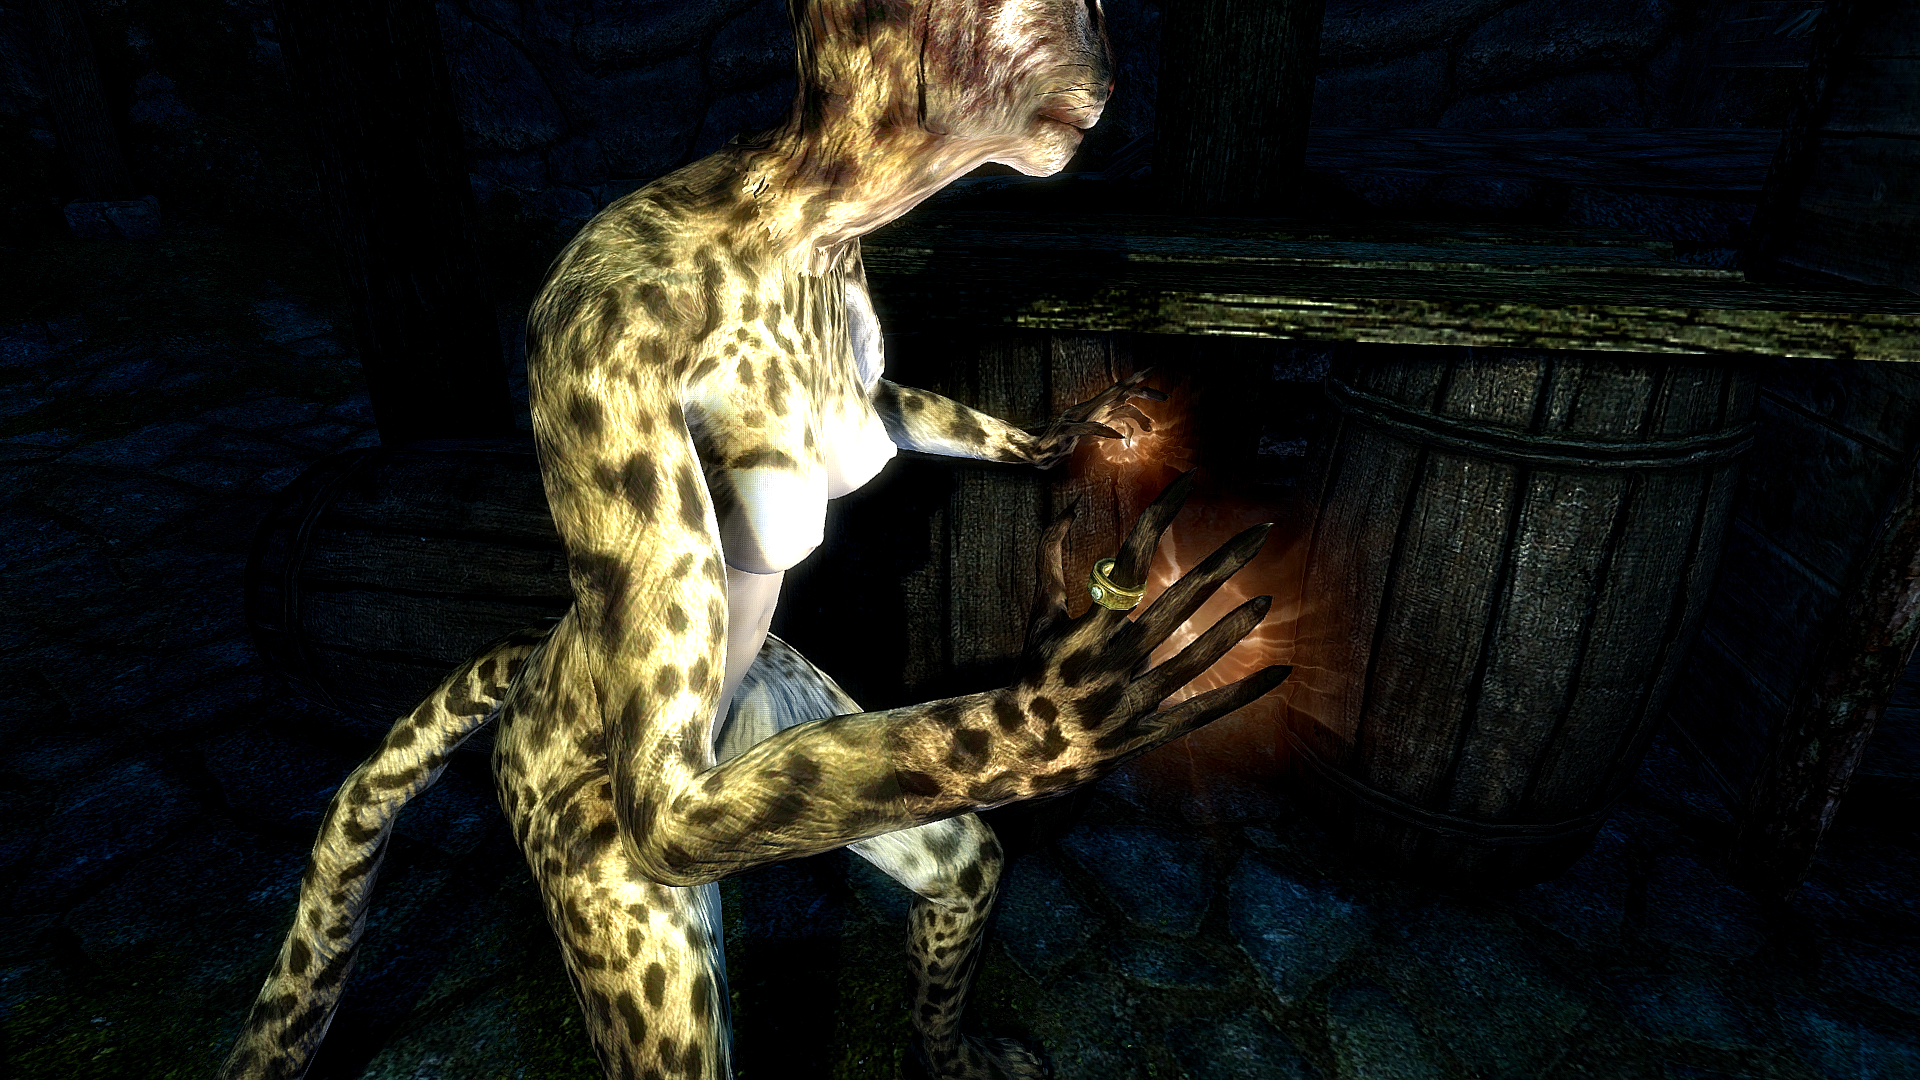 Khajiit does not play these games